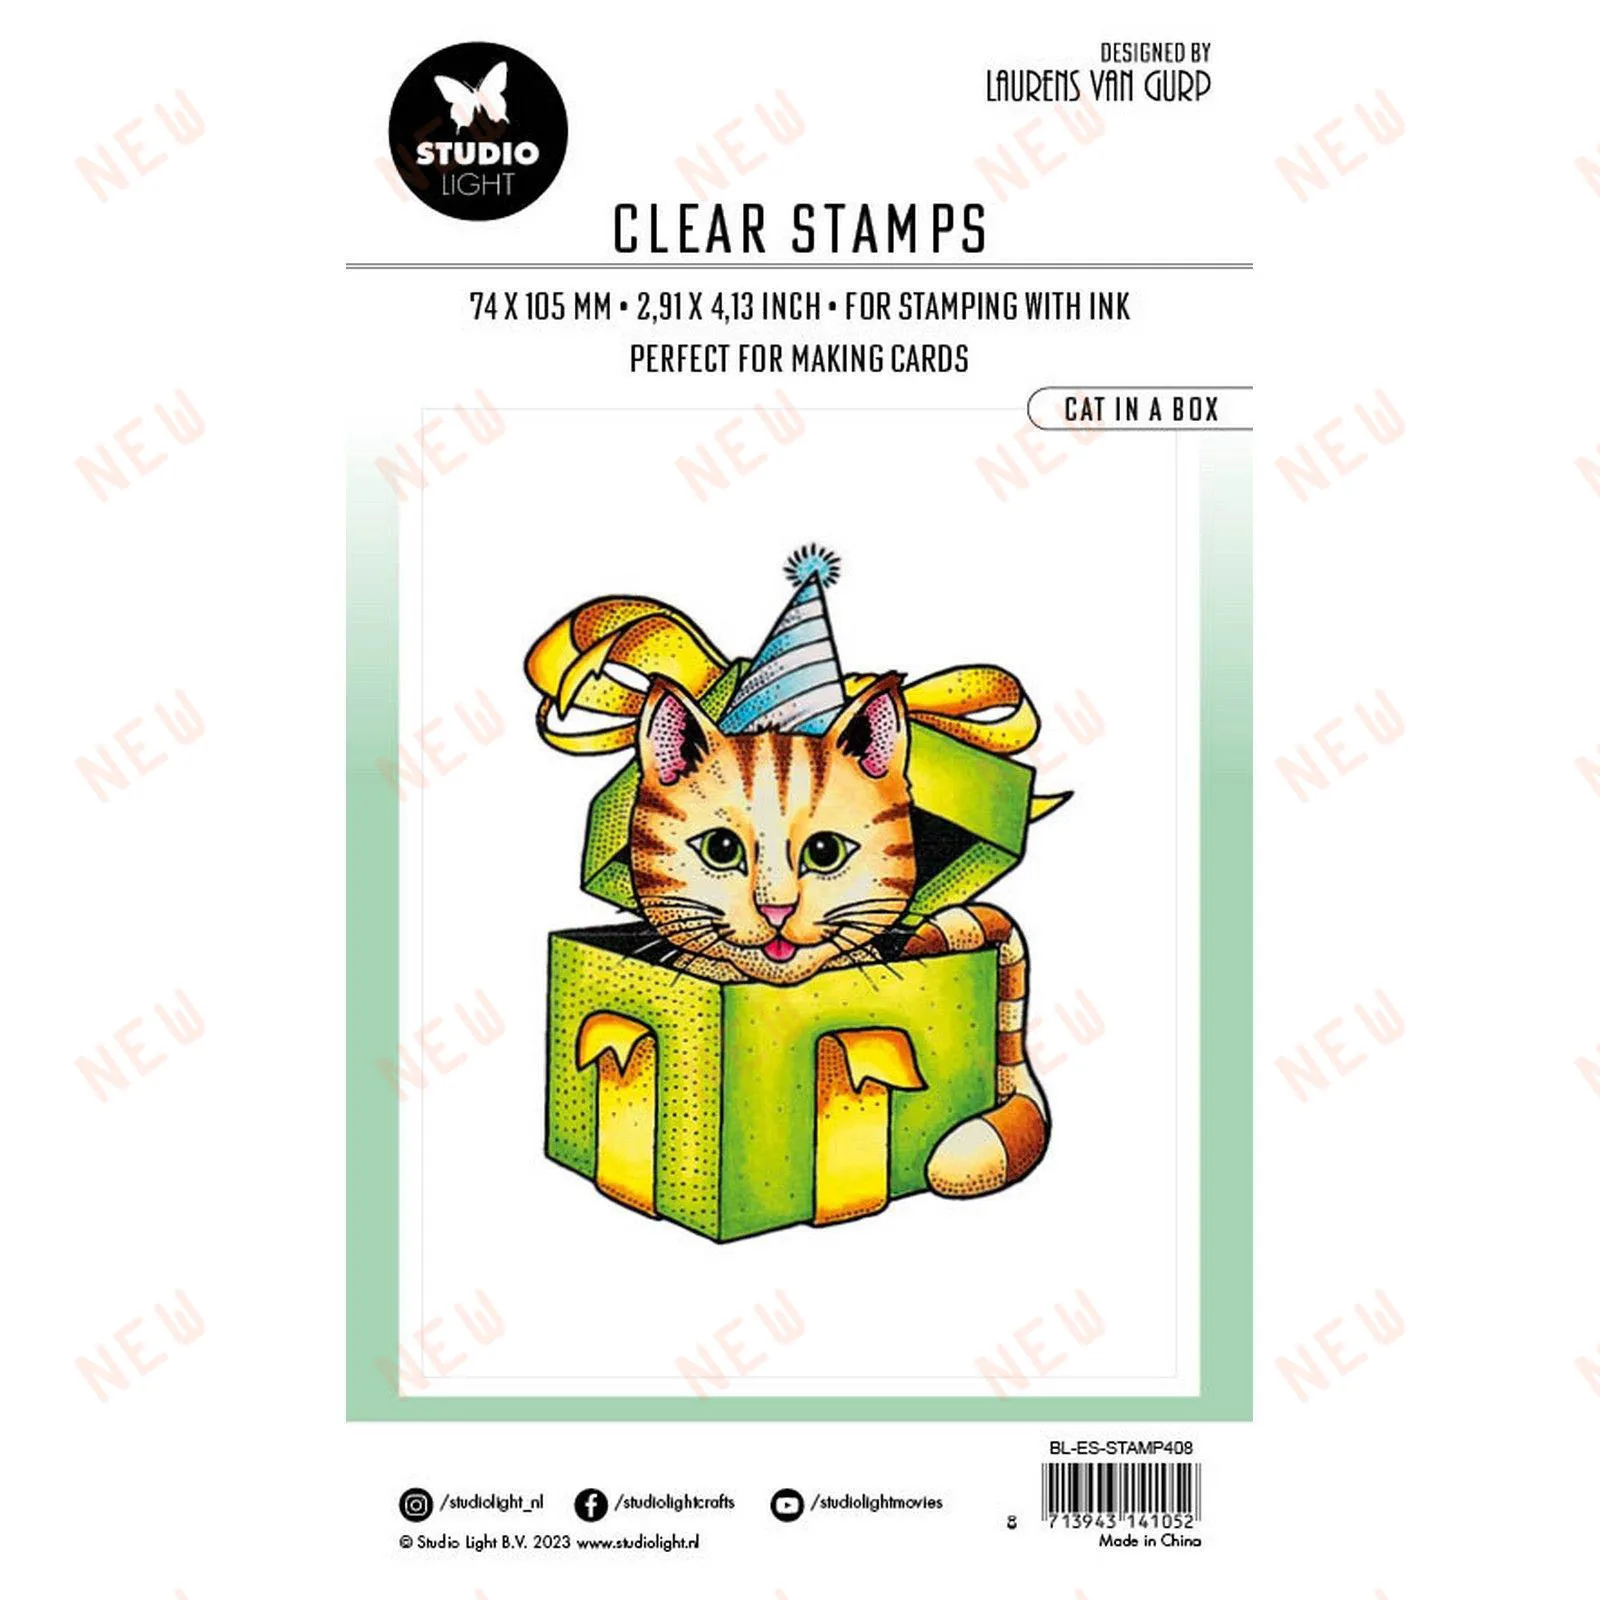 

Clear Stamp Cat in a Box Metal Cutting Dies Stamps Scrapbook Diary Secoration Embossing Stencil Template Diy Greeting Card Hand